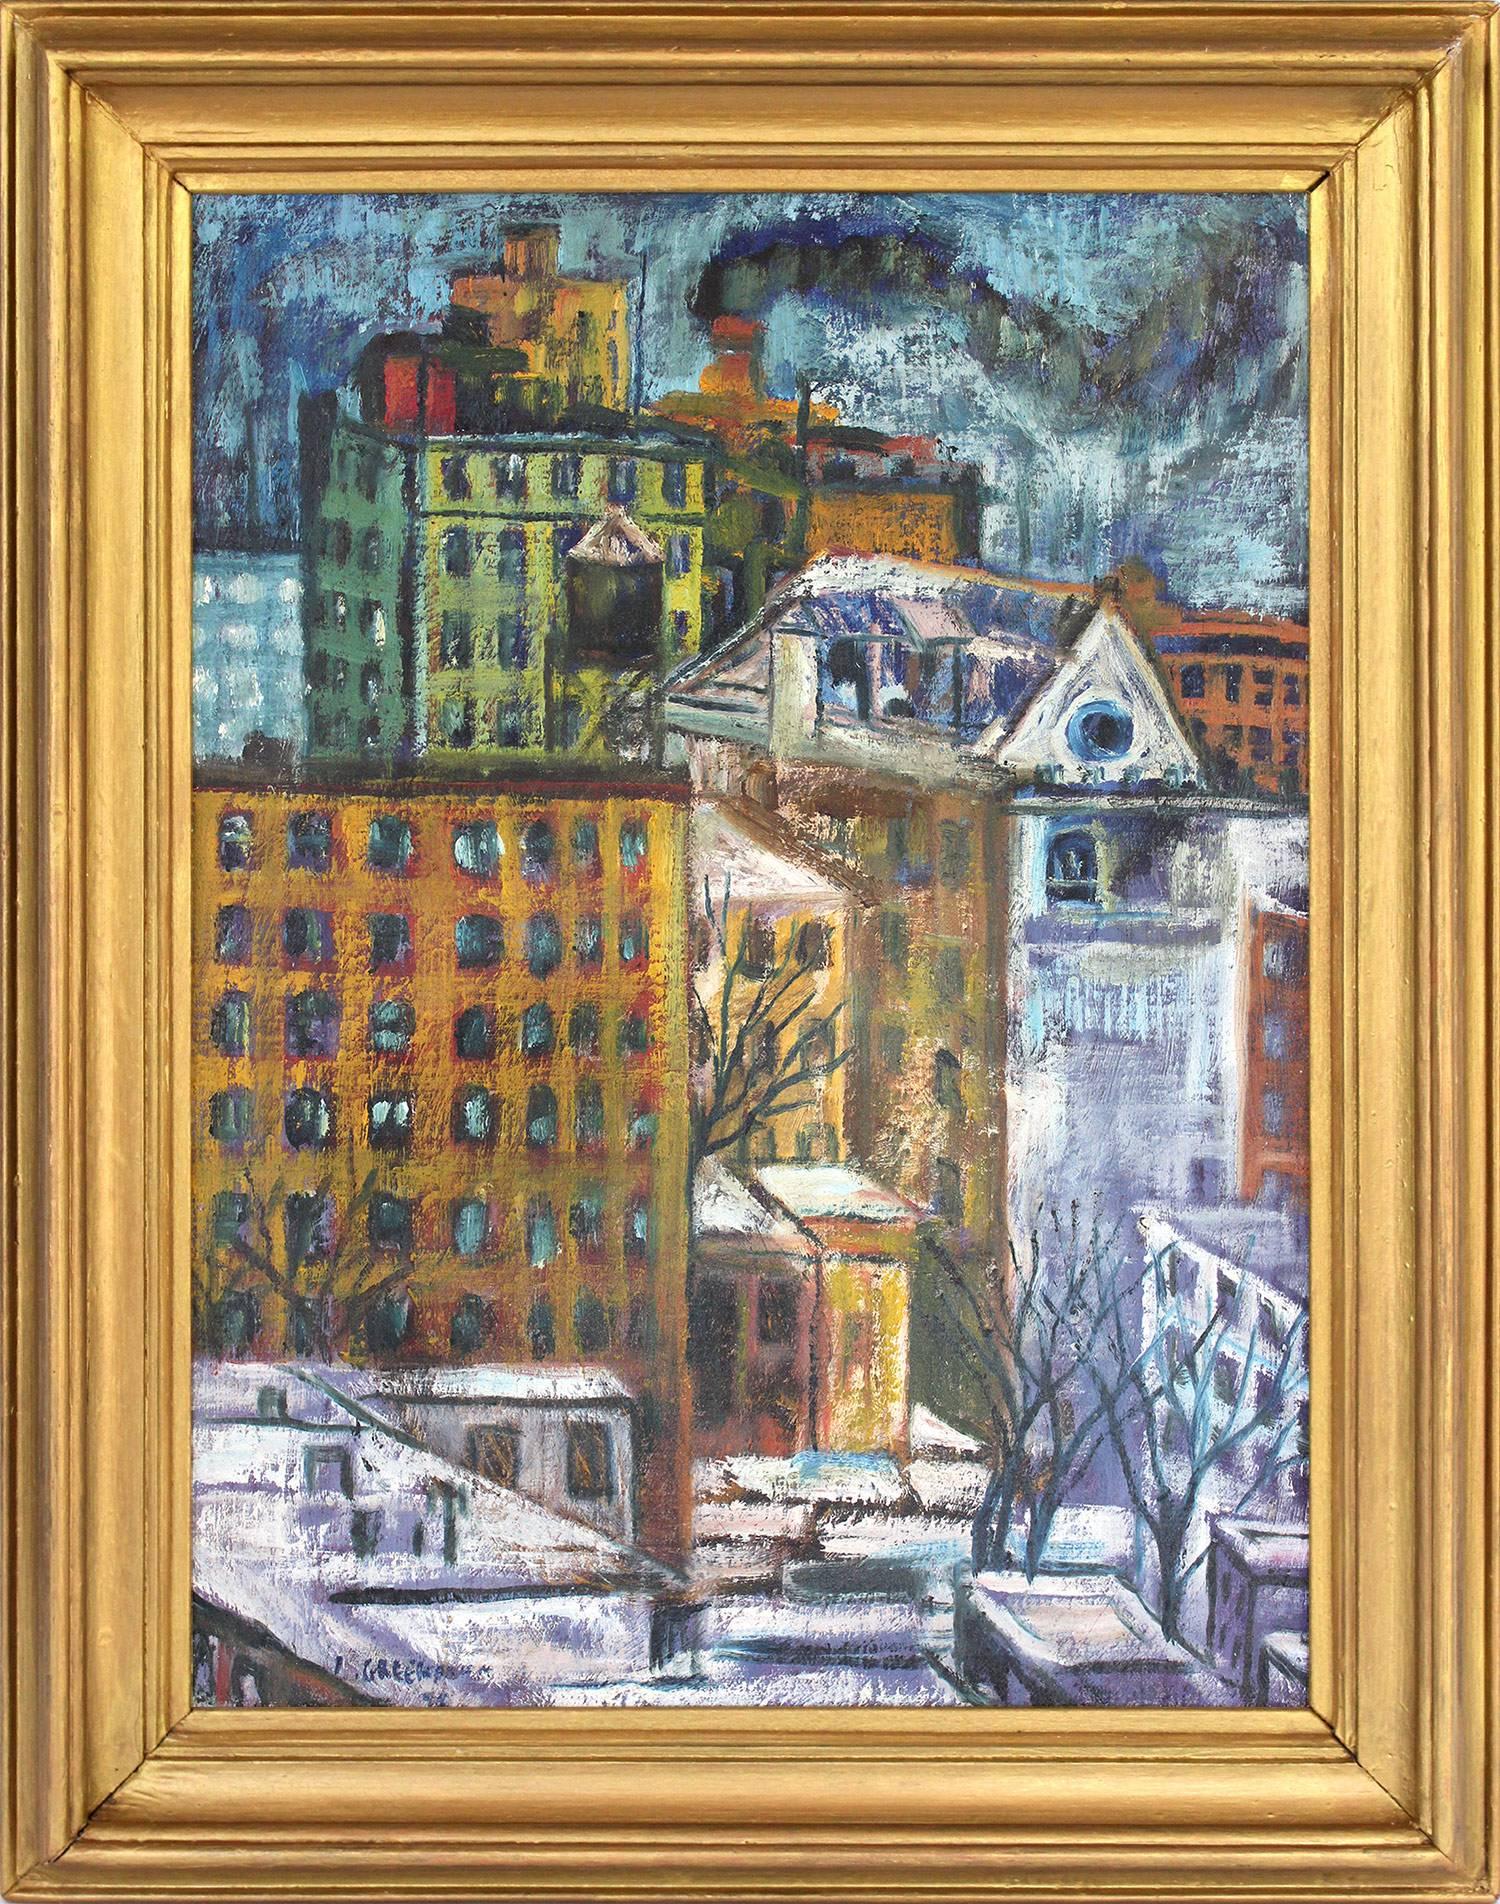 Unknown Landscape Painting - "New York Cityscape" Abstract Impressionist New York City Winter Scene Painting